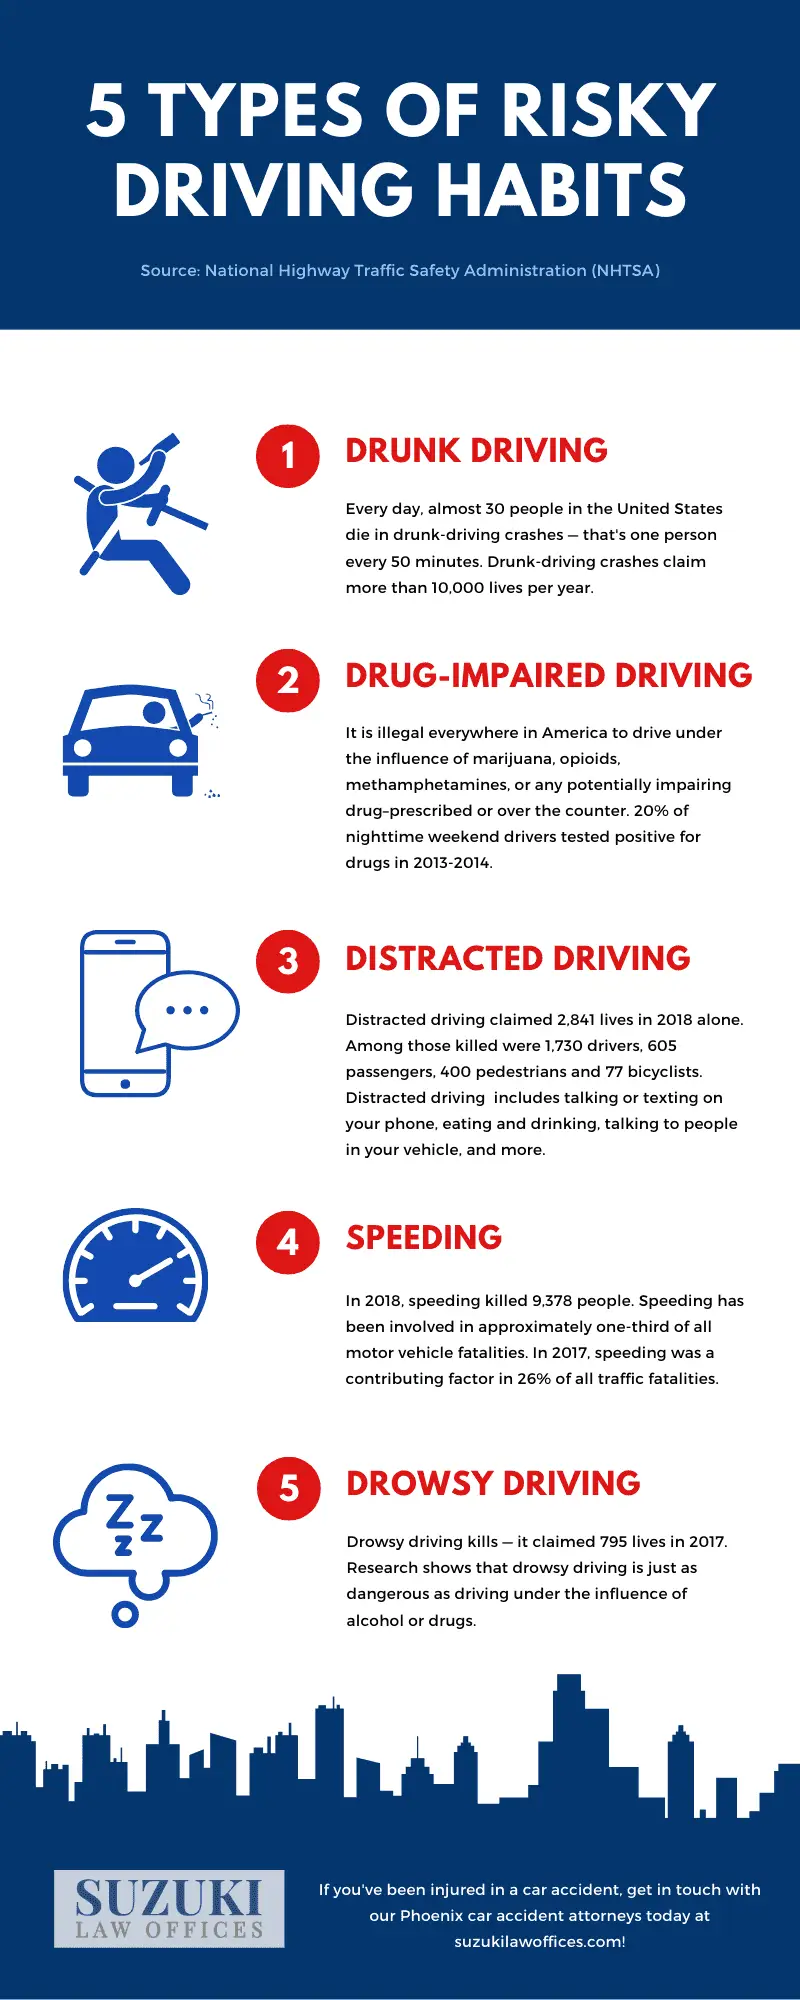 
5 Types of Risky Driving Habits [Infographic]